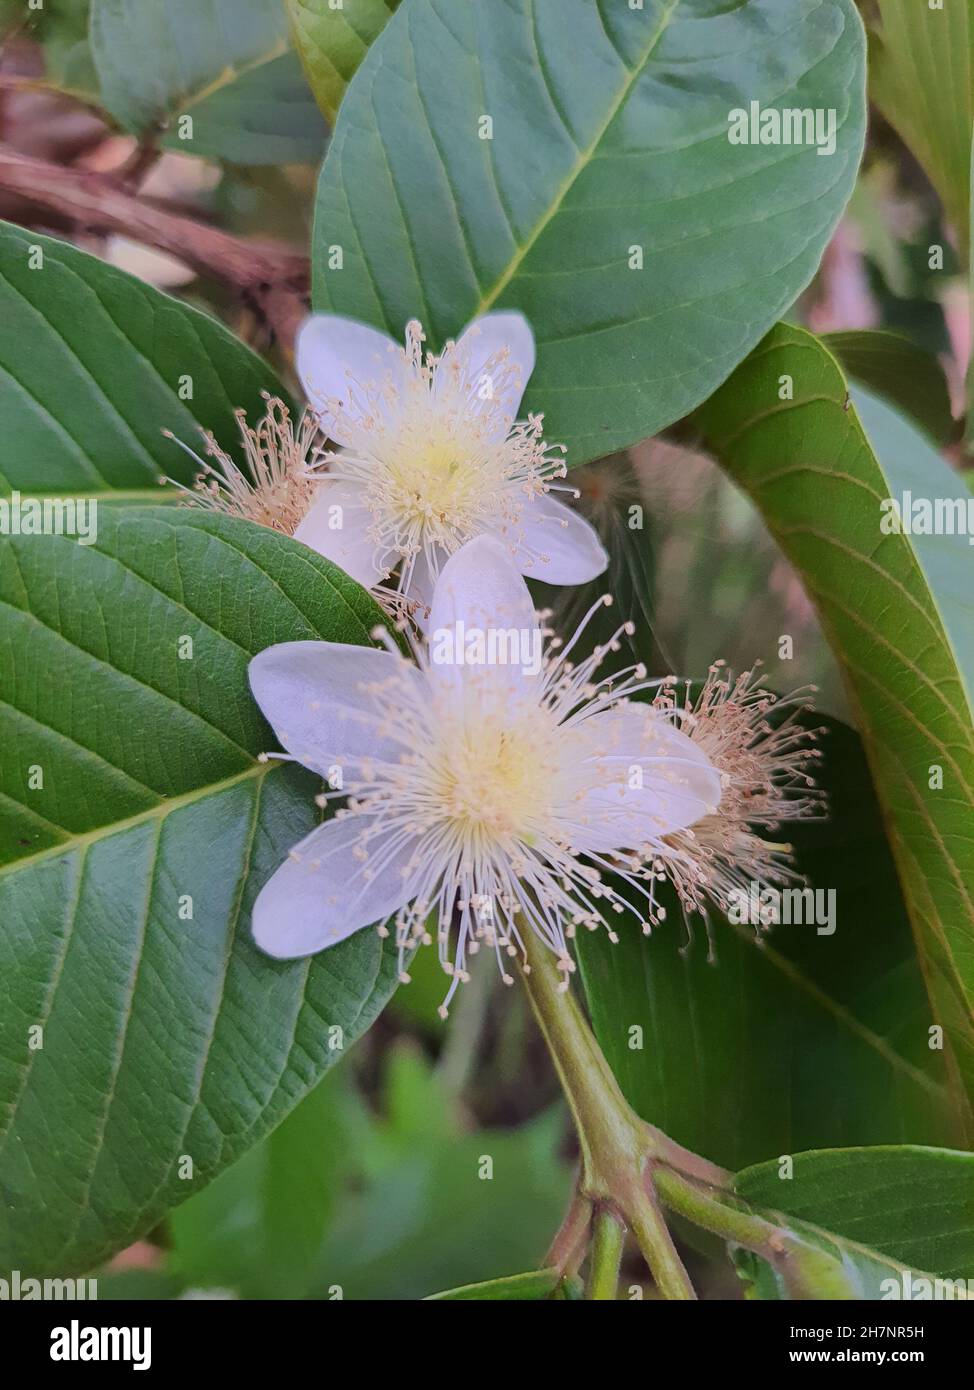 Close-up of a Surinamese or Pitanga cherry blossom in a garden,(Suriname myrtaceae) It is a native tree of the Brazilian Atlantic Forest. Stock Photo